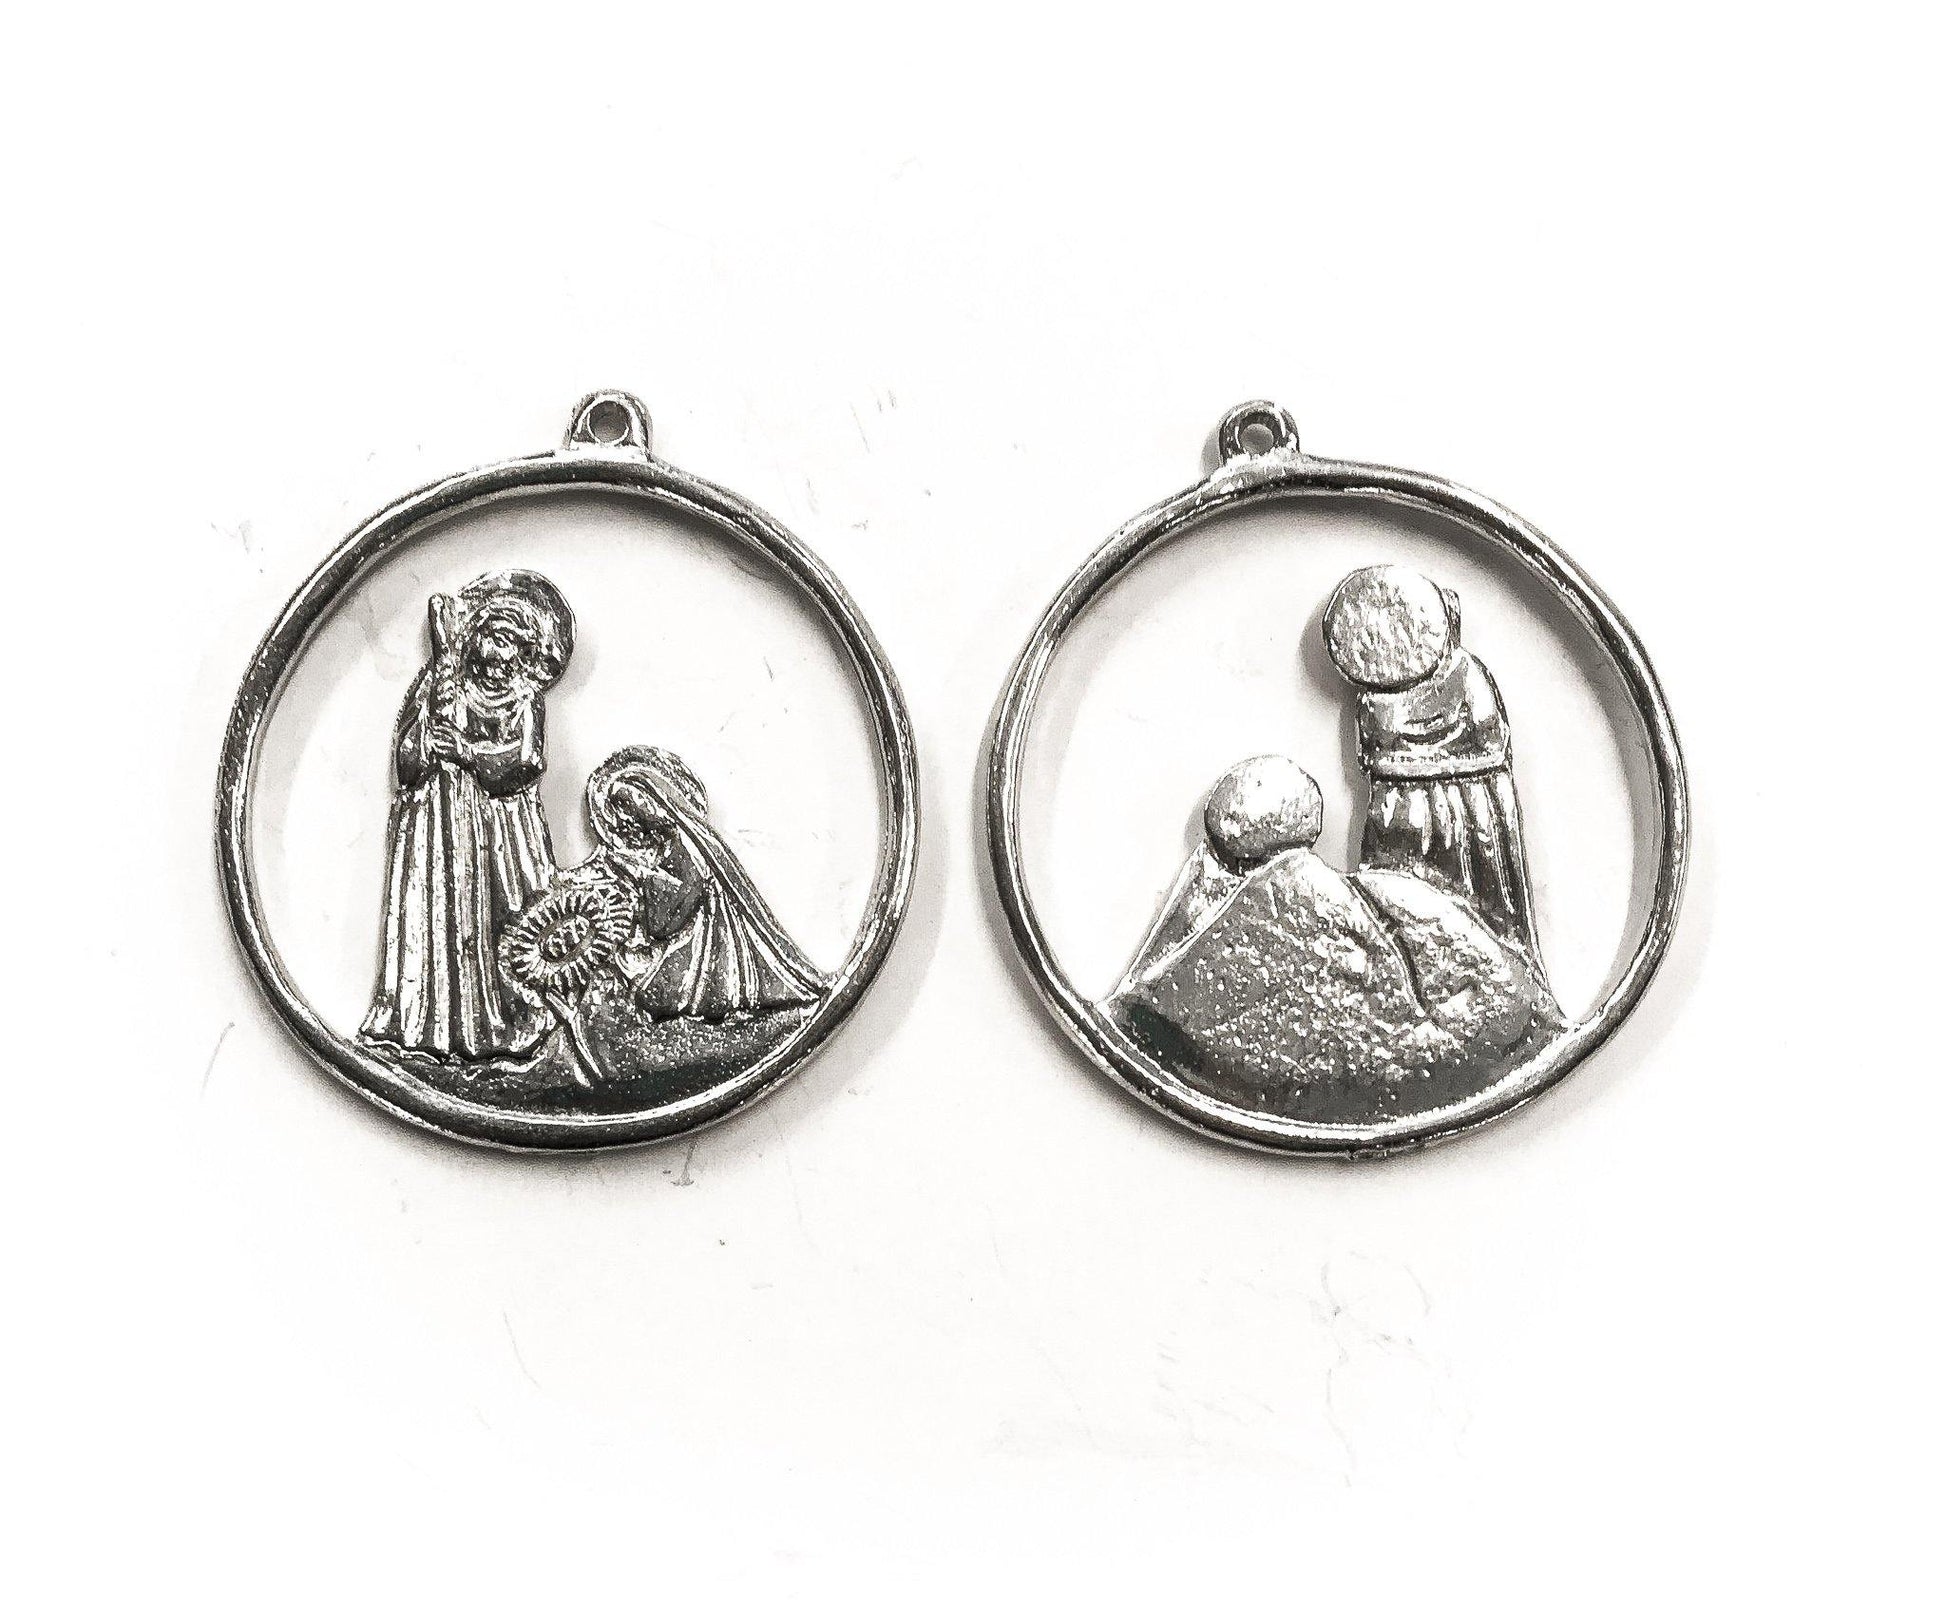 Handmade Nativity Pewter Pendant Necklace, Christian Christmas Gift - House of Morgan Pewter